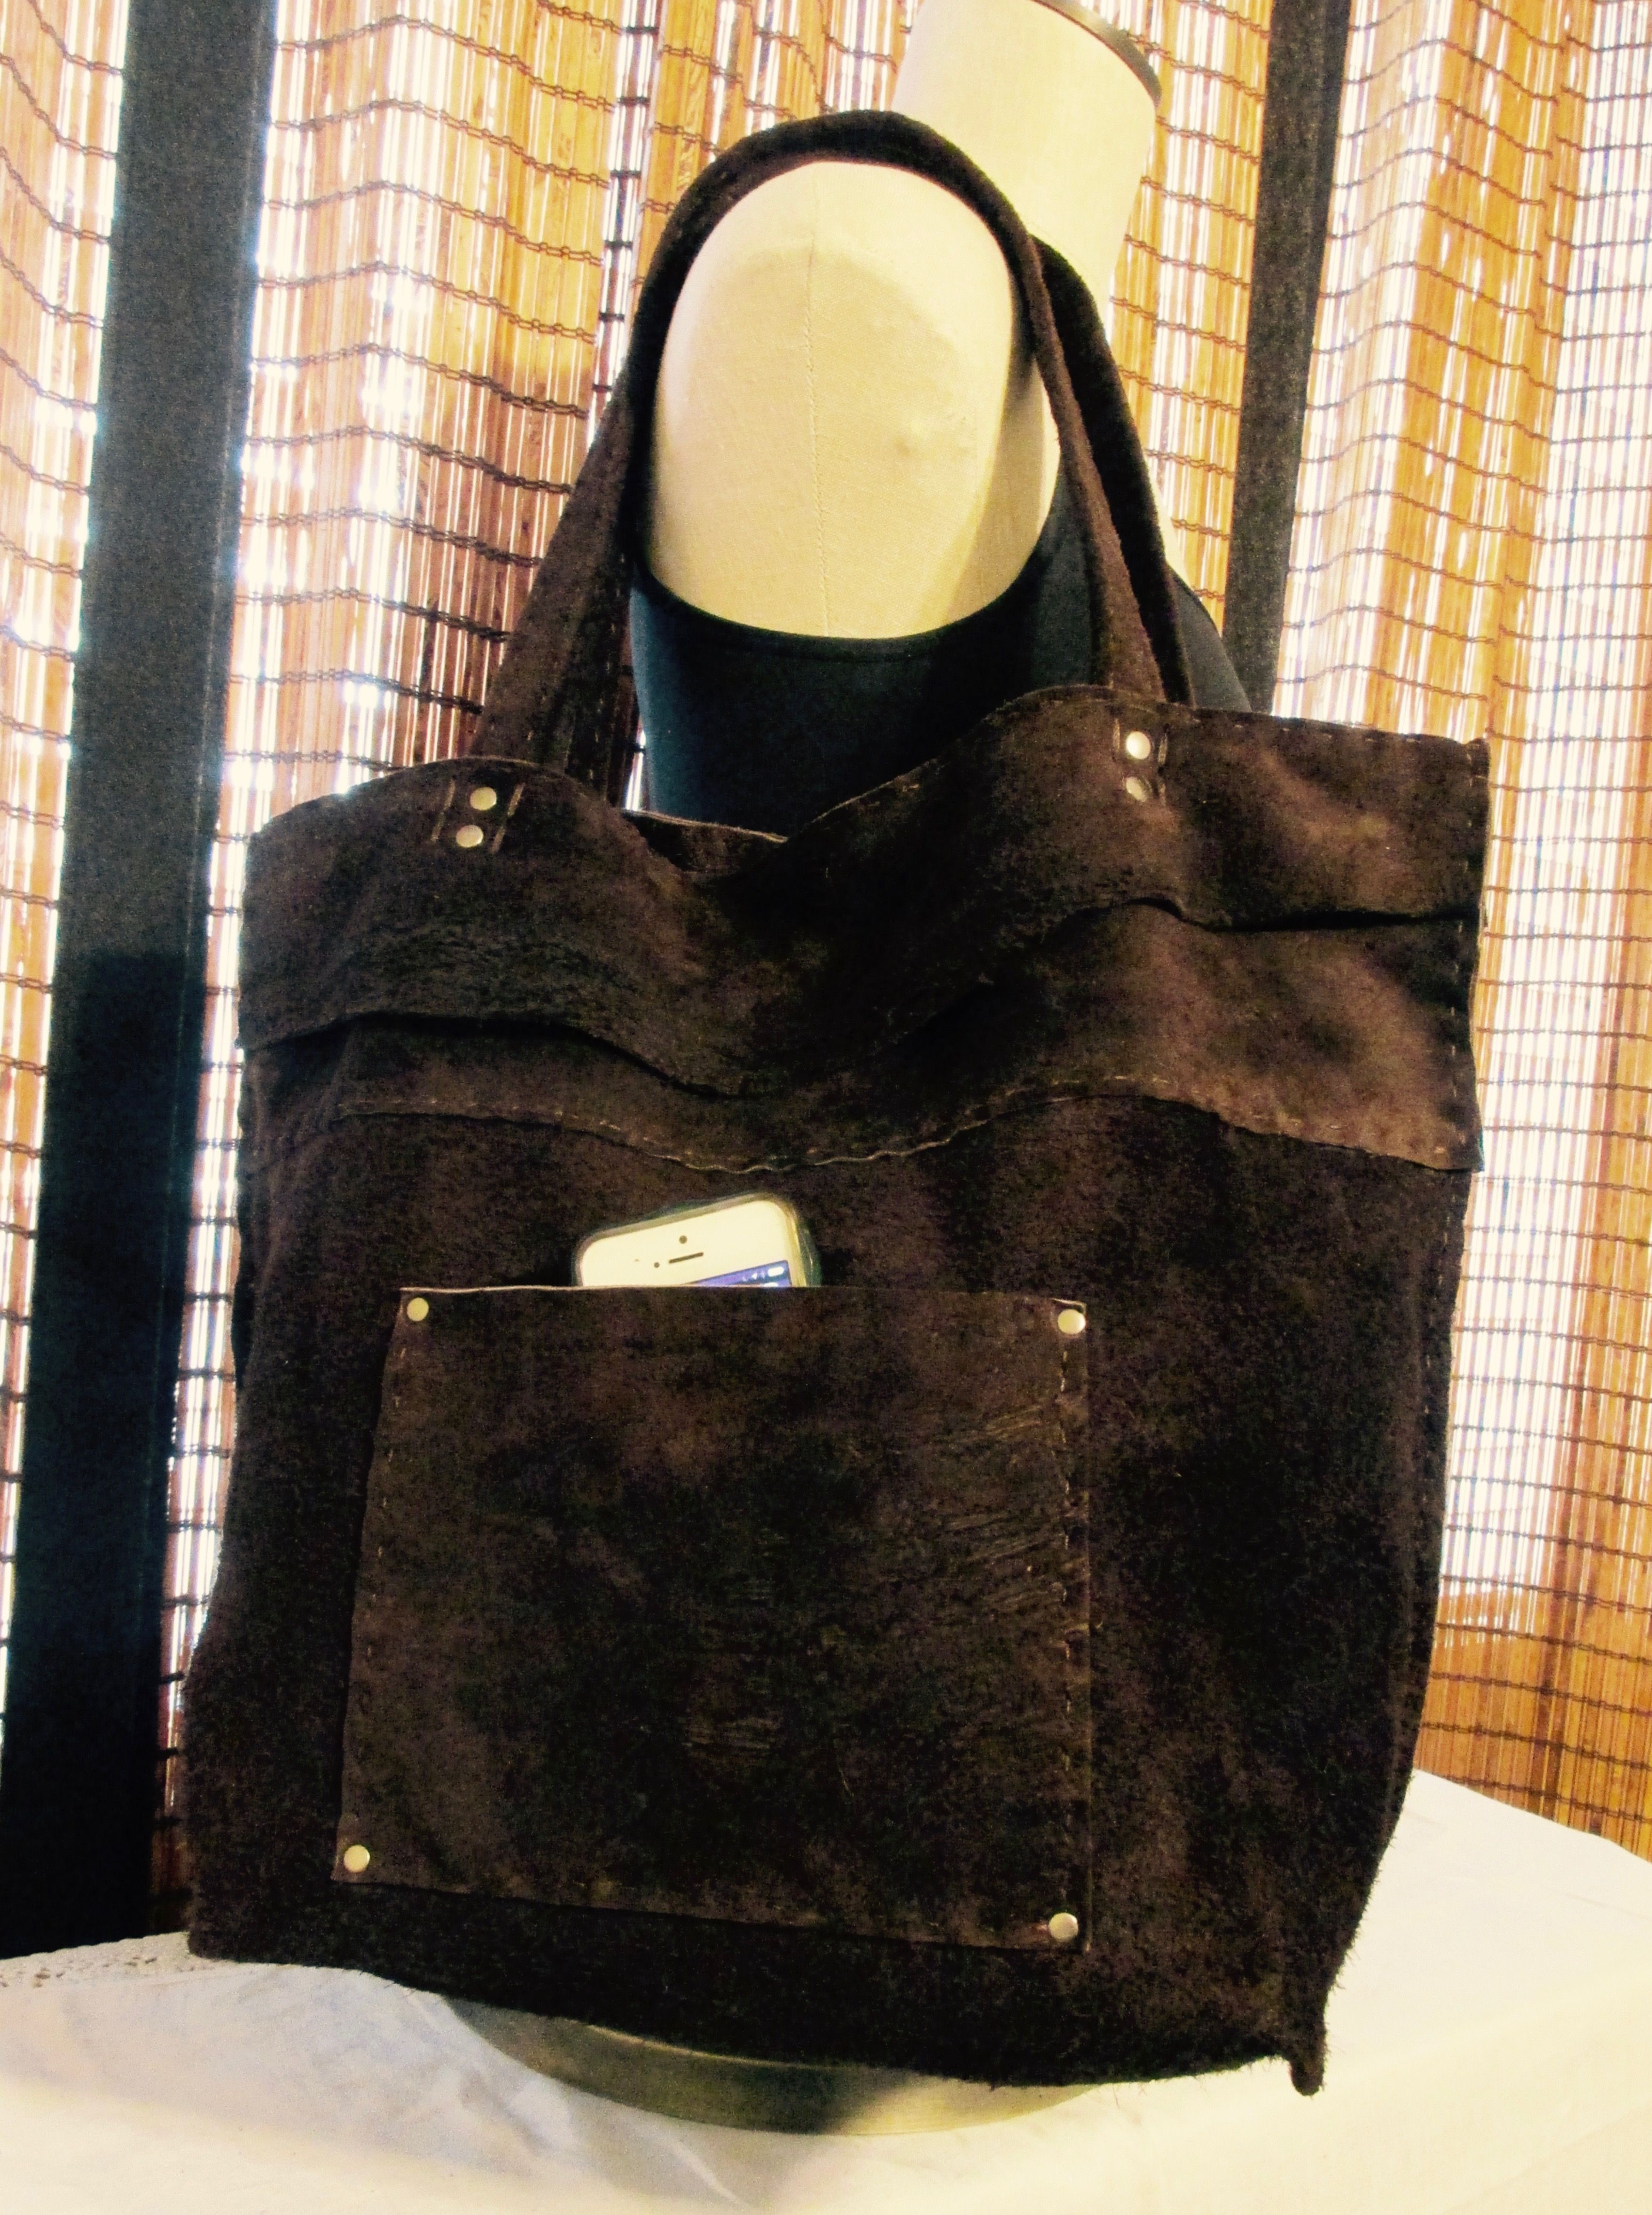 Buy Handmade Large Nubuck Leather Dark Brown Tote Bag Boho Western, made to  order from Resplendent Leather